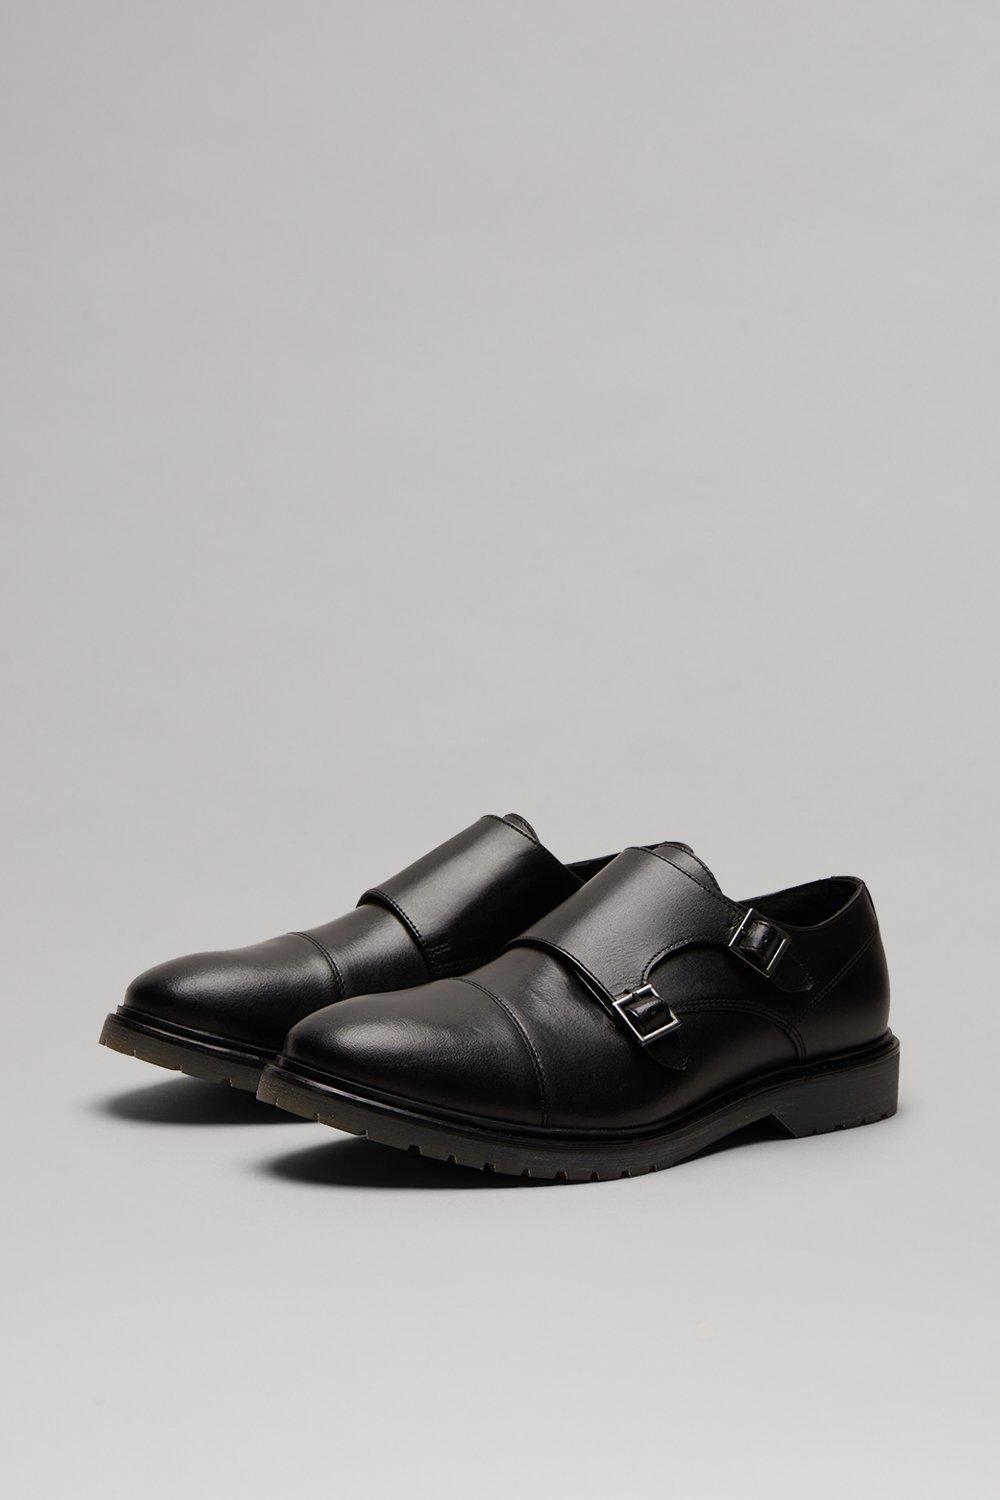 Mens Black Monk Strap Shoes With Chunky Sole - 6